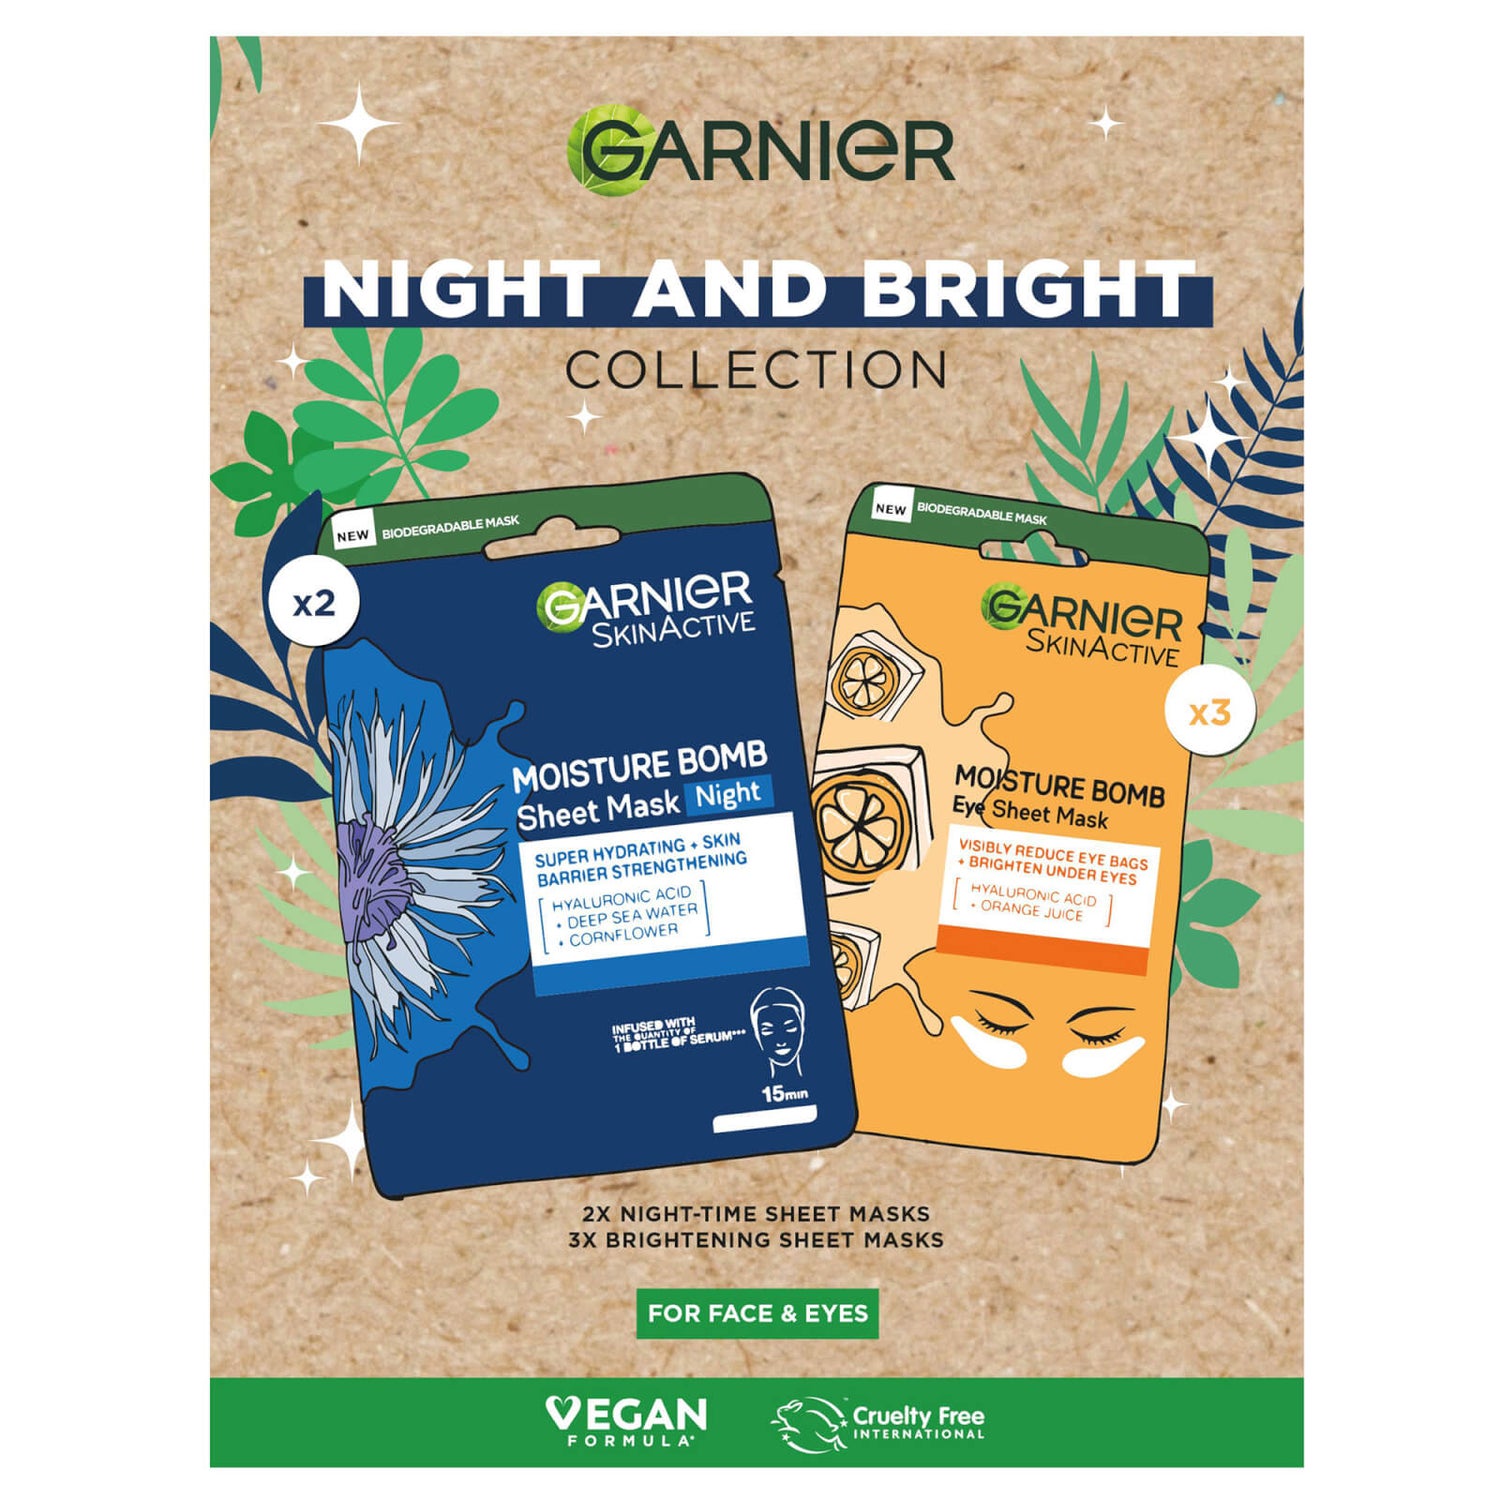 Masques en feuilles Garnier Collection Night and Bright